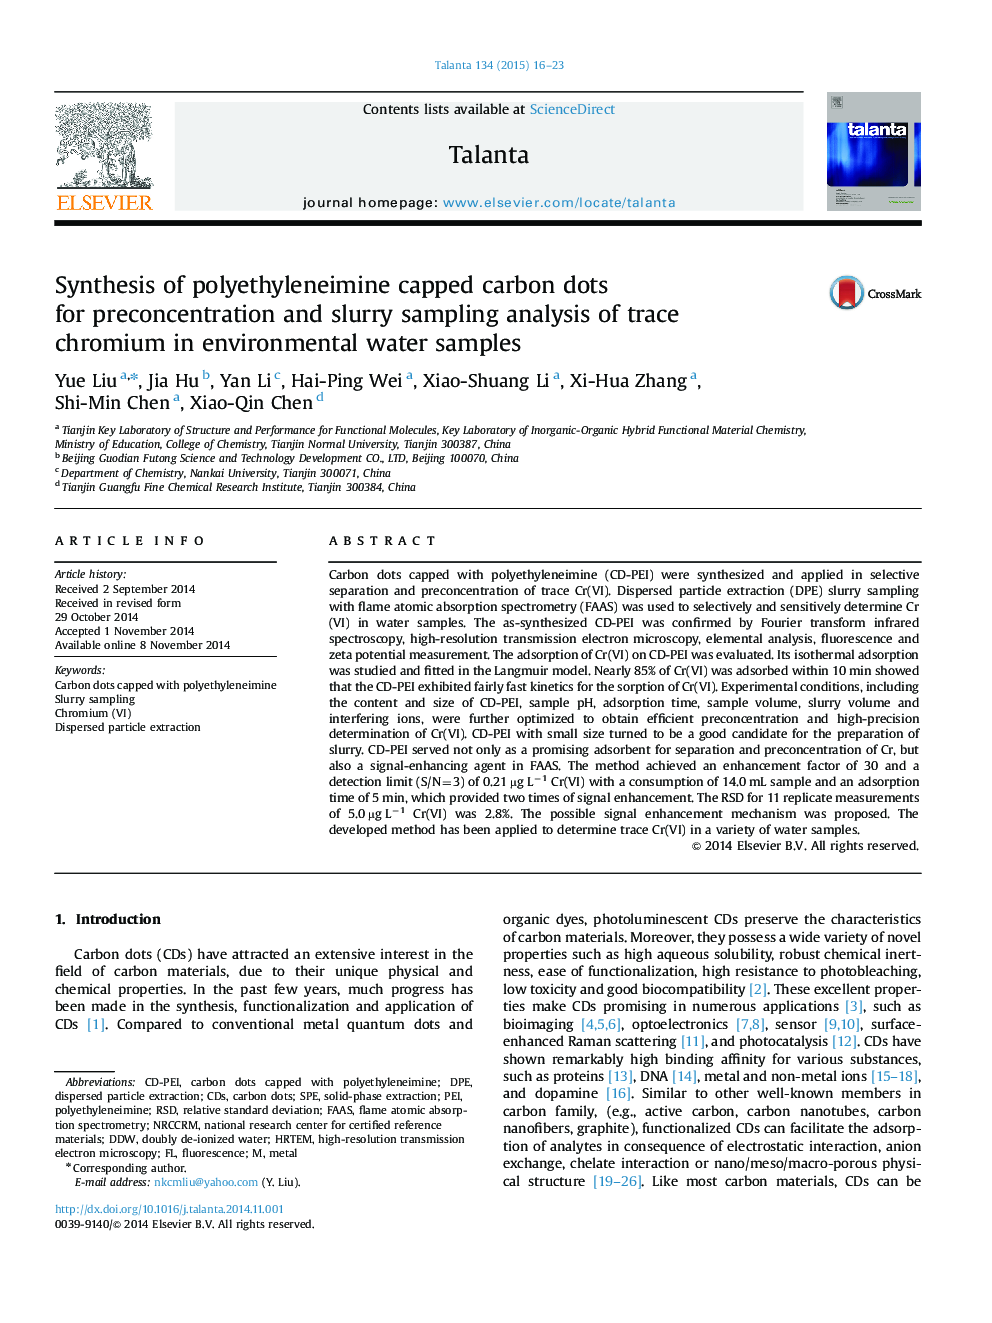 Synthesis of polyethyleneimine capped carbon dots for preconcentration and slurry sampling analysis of trace chromium in environmental water samples